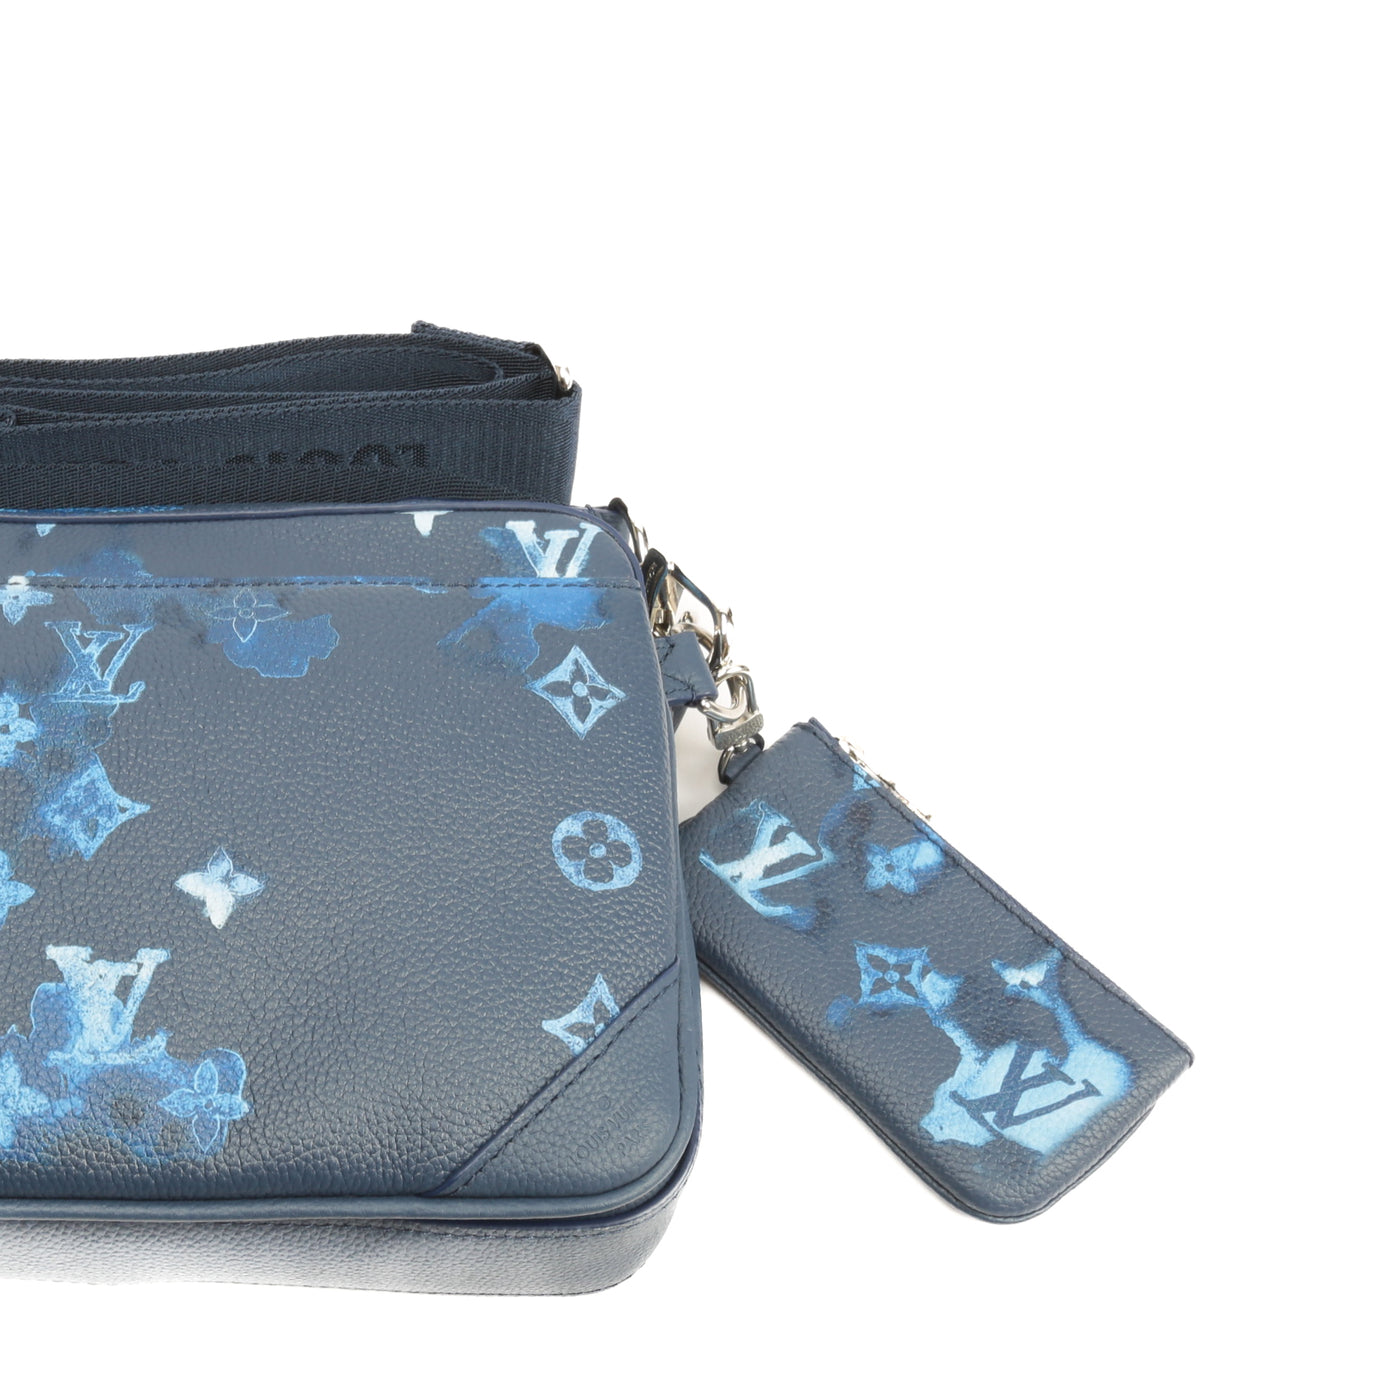 Buy Online Louis Vuitton-WATERCOLOR INK TRIO MESSENGER-M57840 with